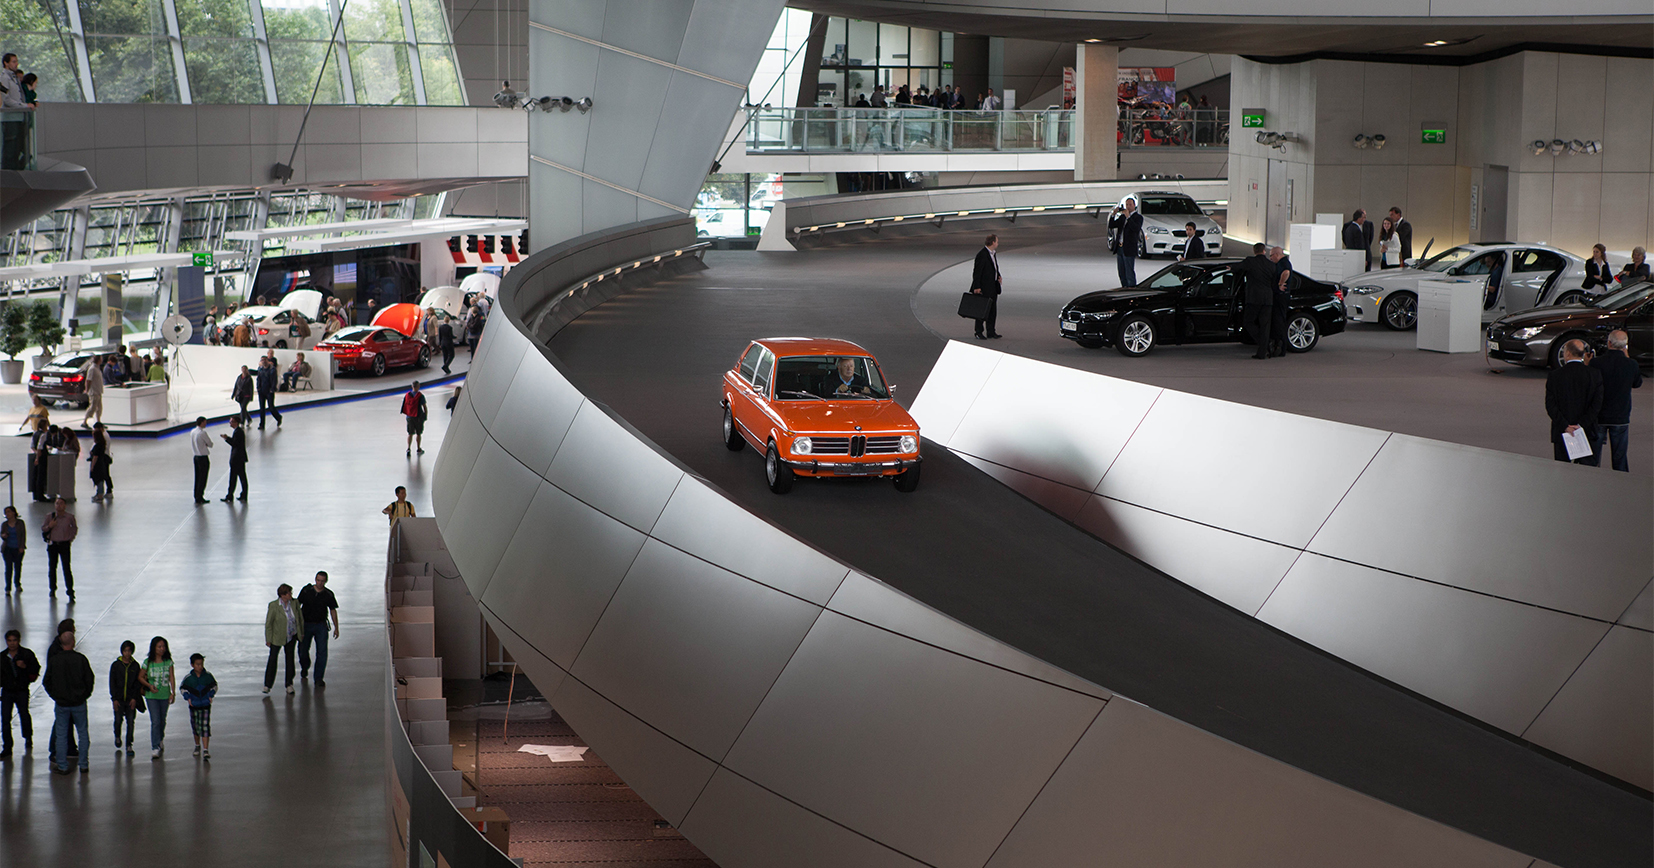 2007 - BMW group Handover of BMW 200 Touring at BMW Welt